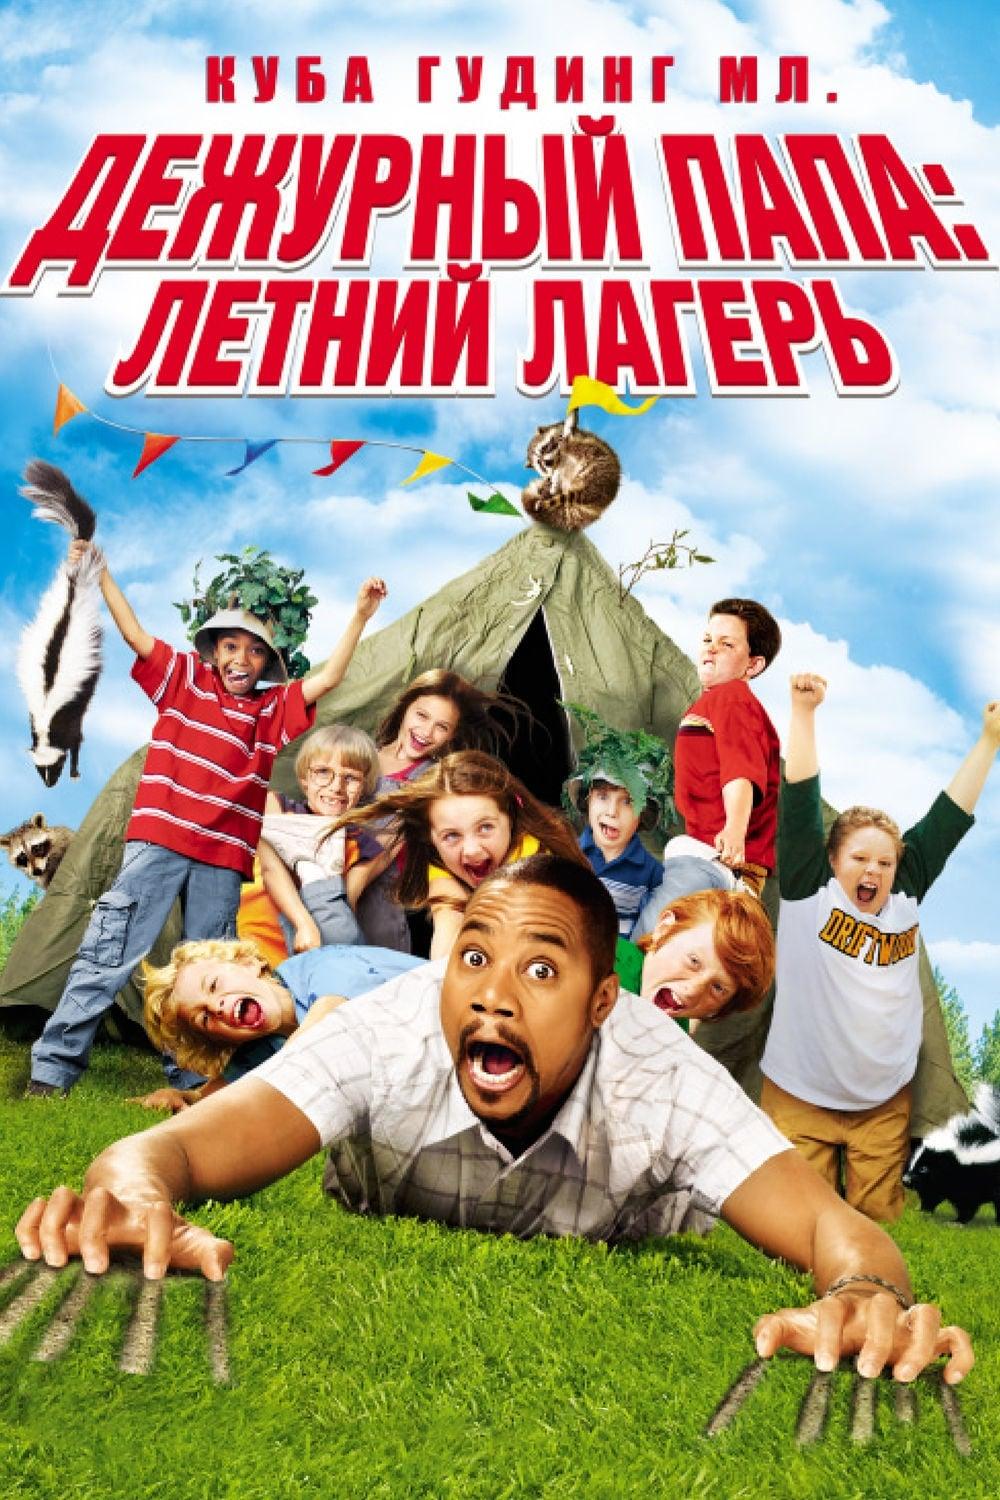 Daddy Day Camp poster